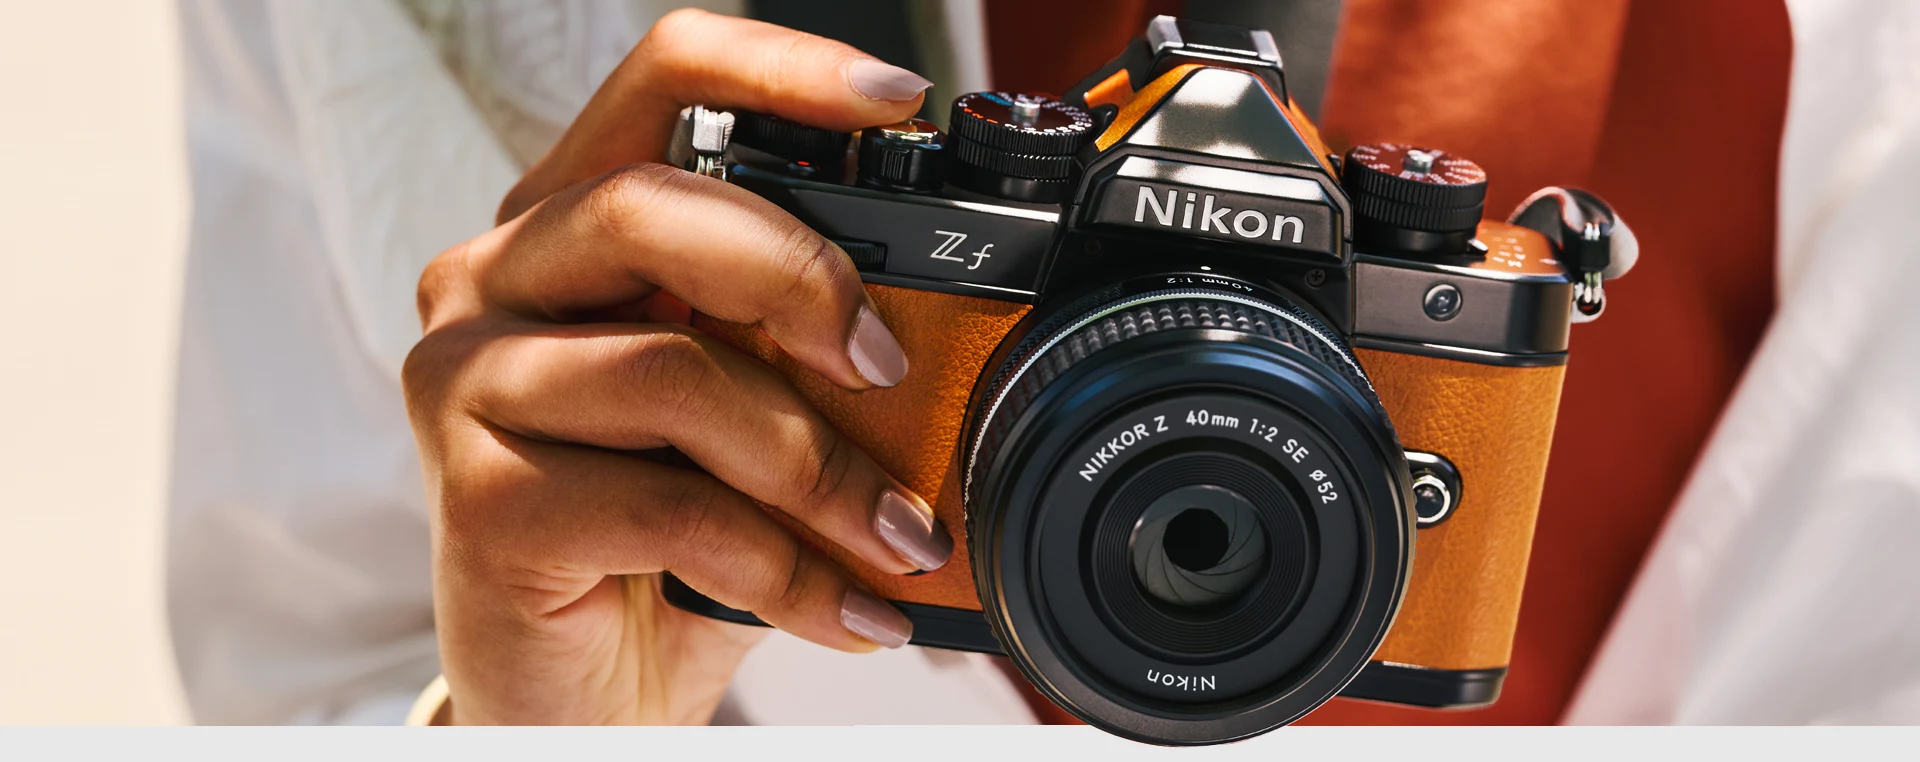 Christmas gift ideas: the best Nikon gifts